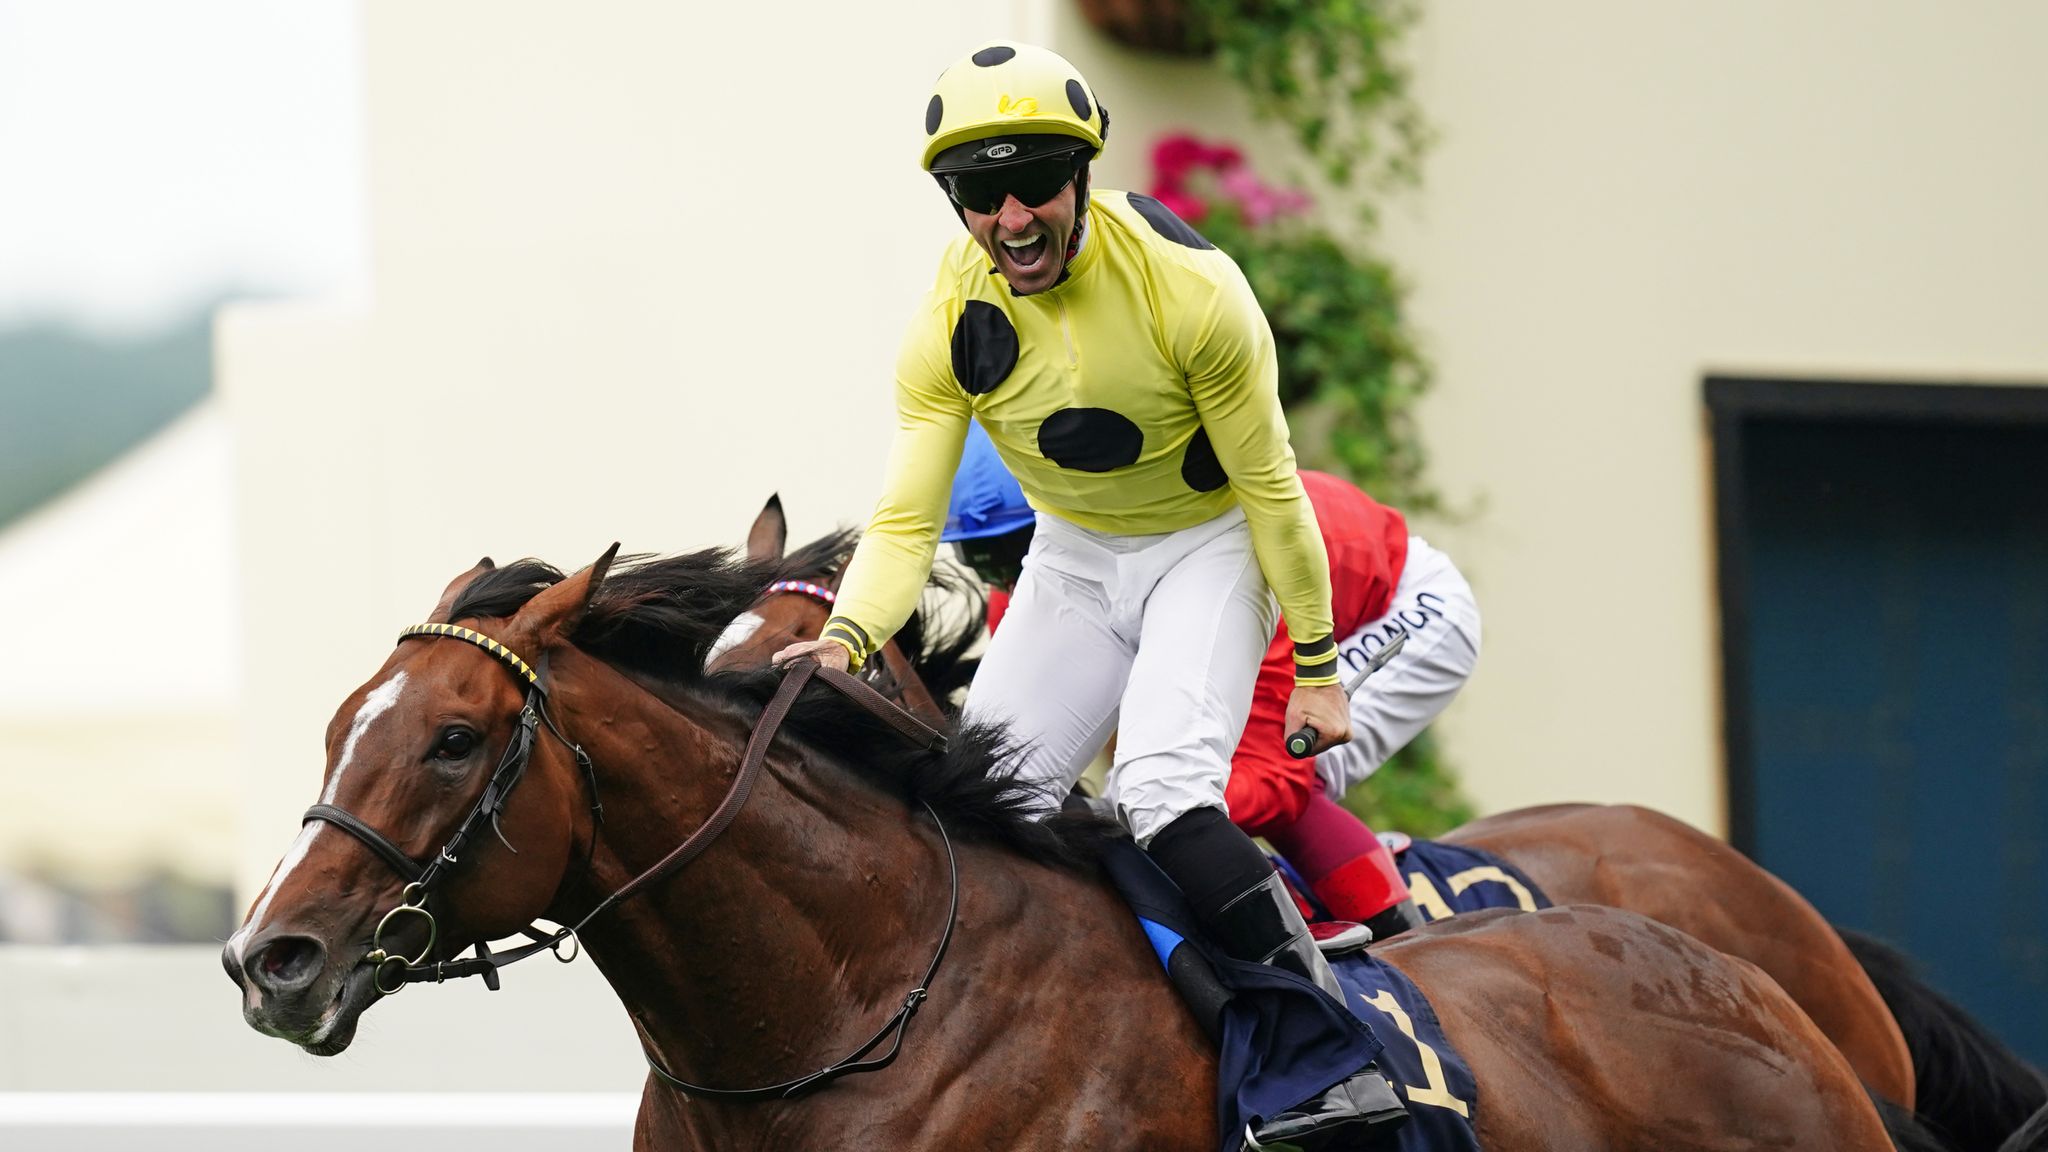 Royal Ascot: Triple Time causes 33/1 upset in Queen Anne Stakes to